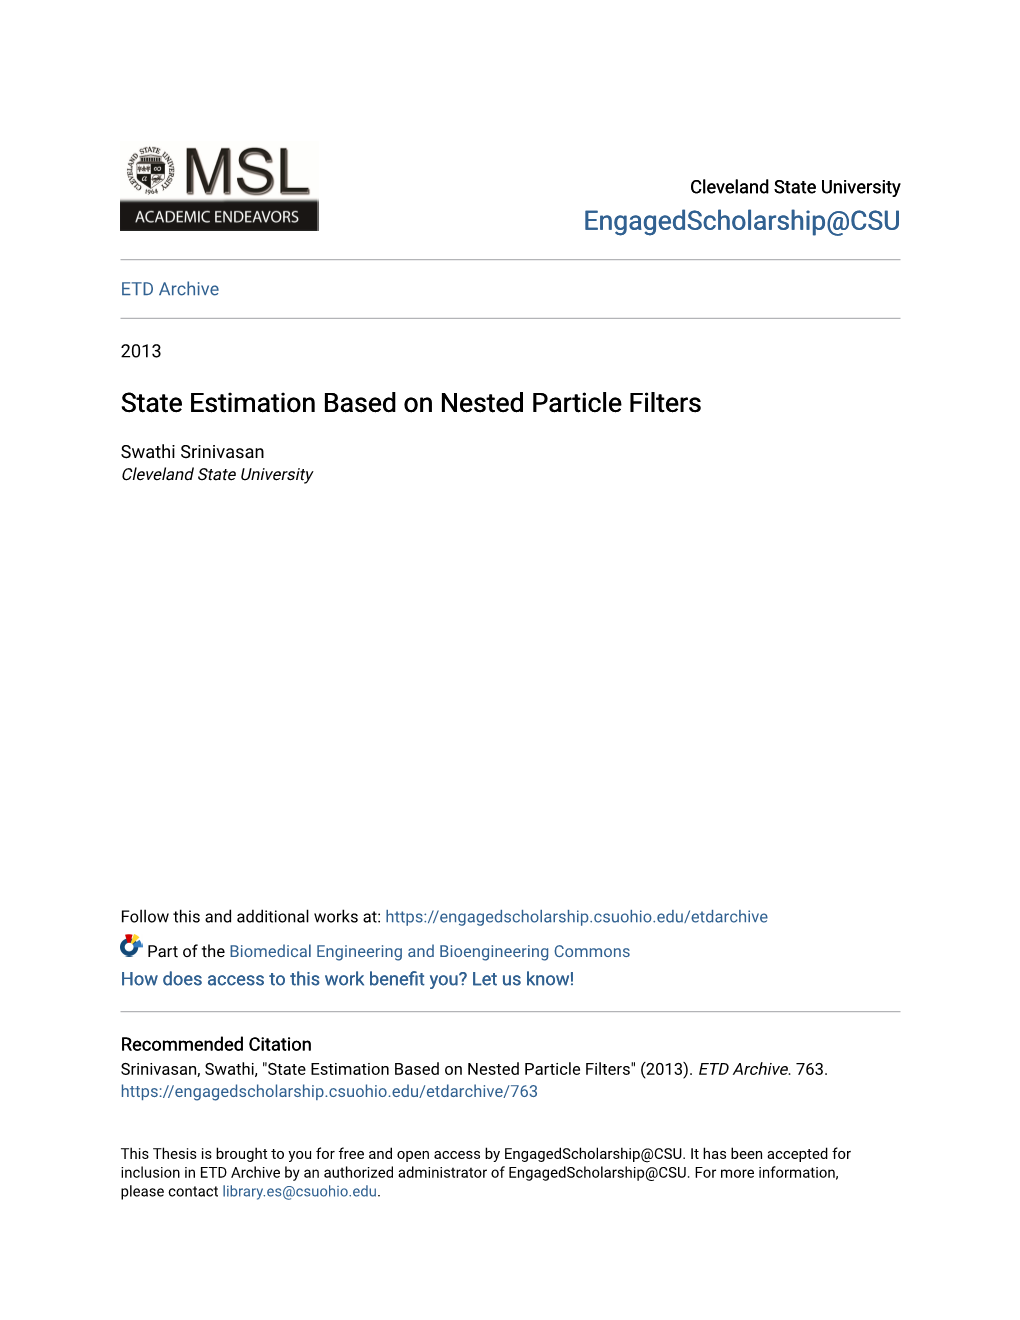 State Estimation Based on Nested Particle Filters